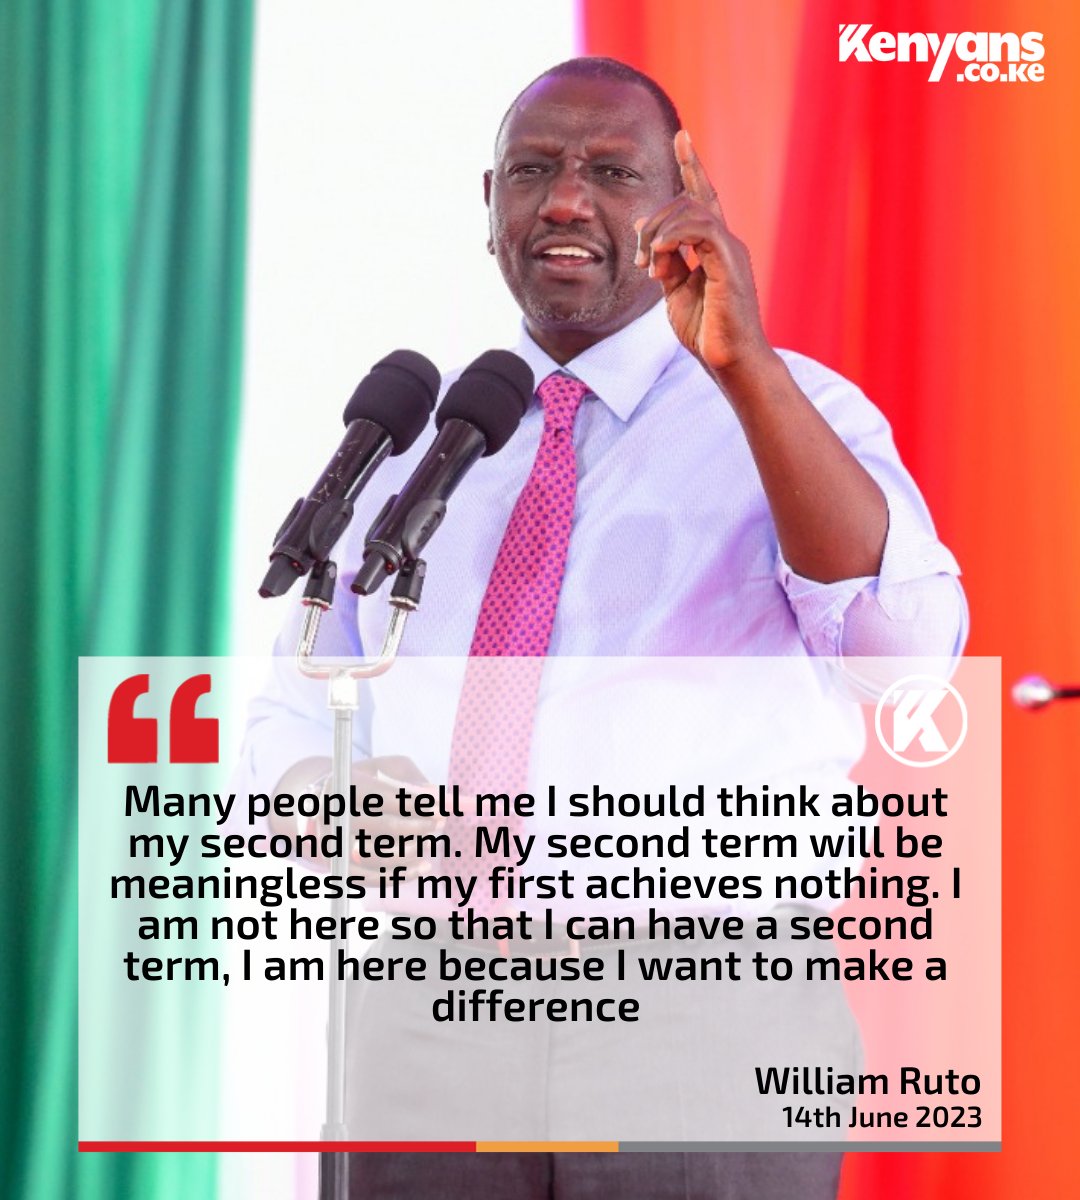 Thank you sir, you have done literally nothing en you have started talking about terms. You have my vote for 4yrs for delivering what you promised fellow hasolas 

#IStandWithDee #Budget2023KE President Ruto Esther Passaris